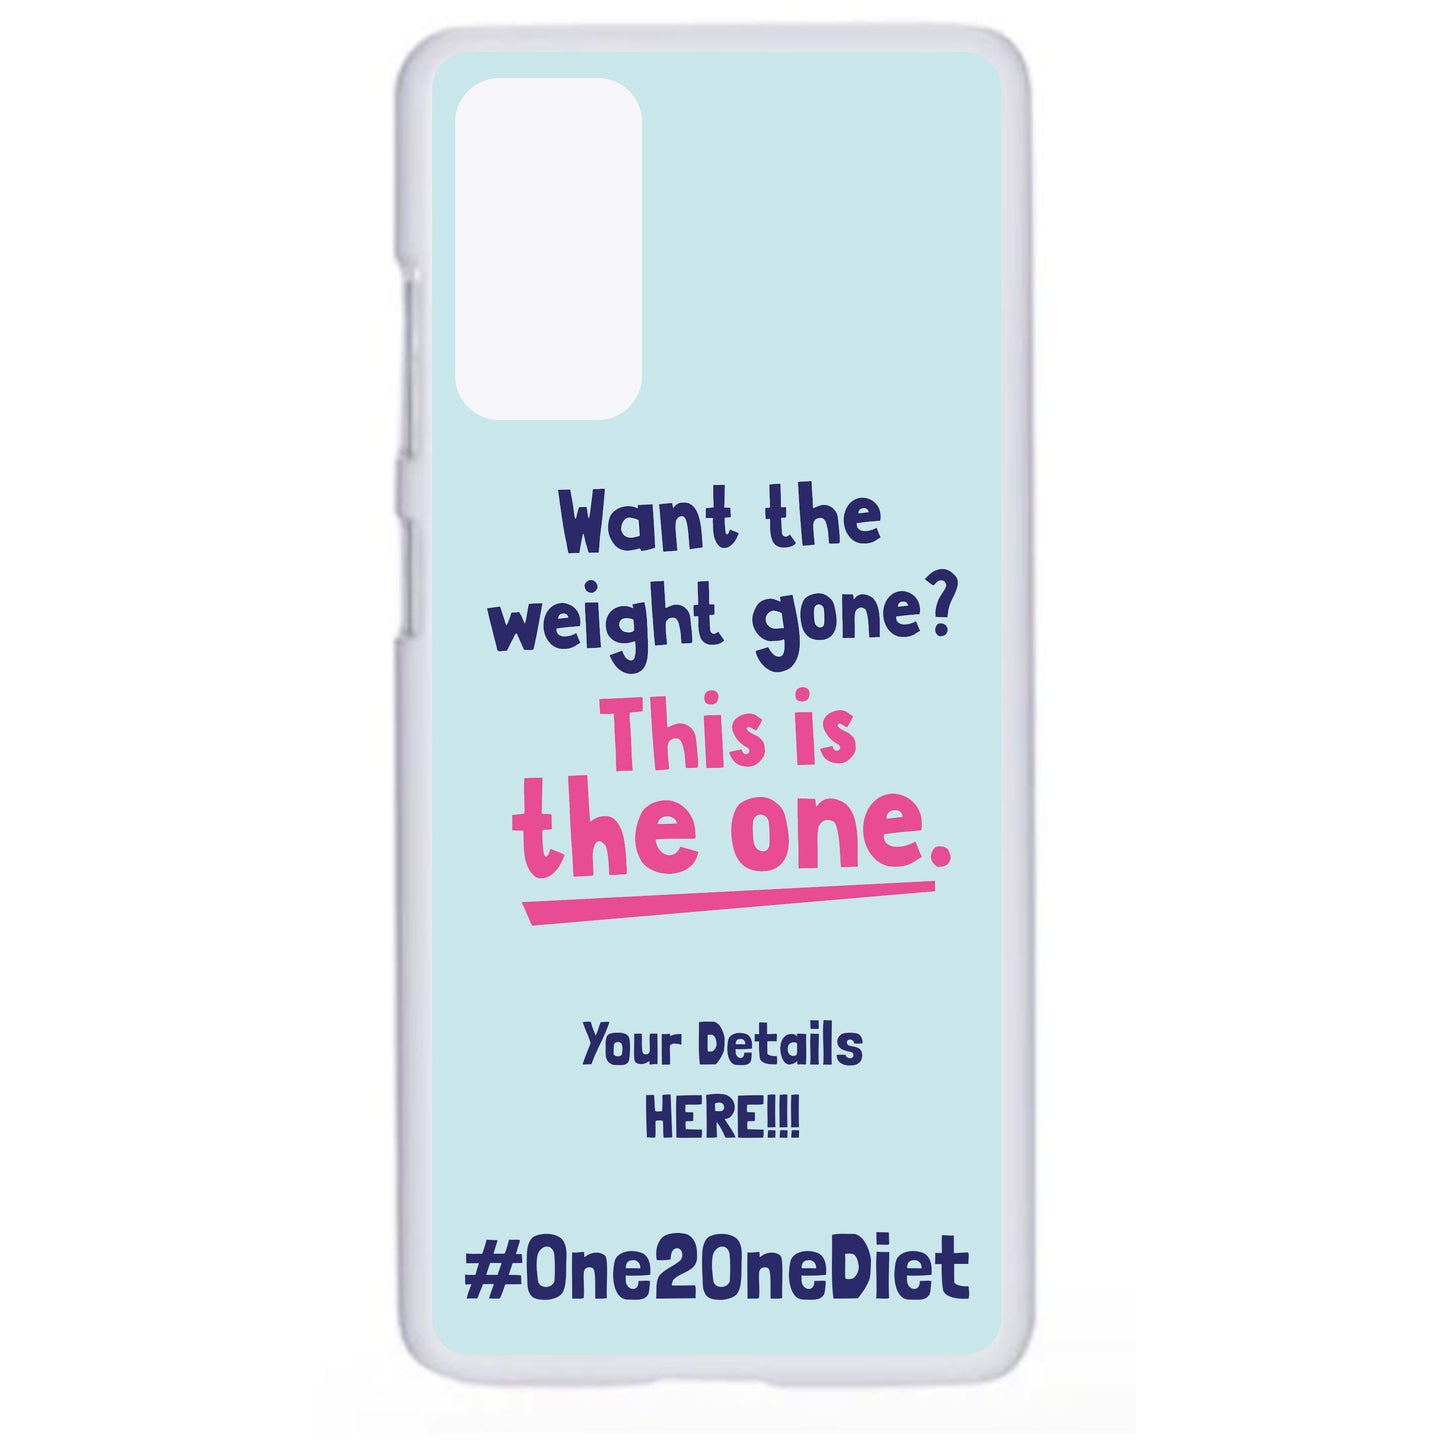 The 1:1 Diet - iphone Phone Case